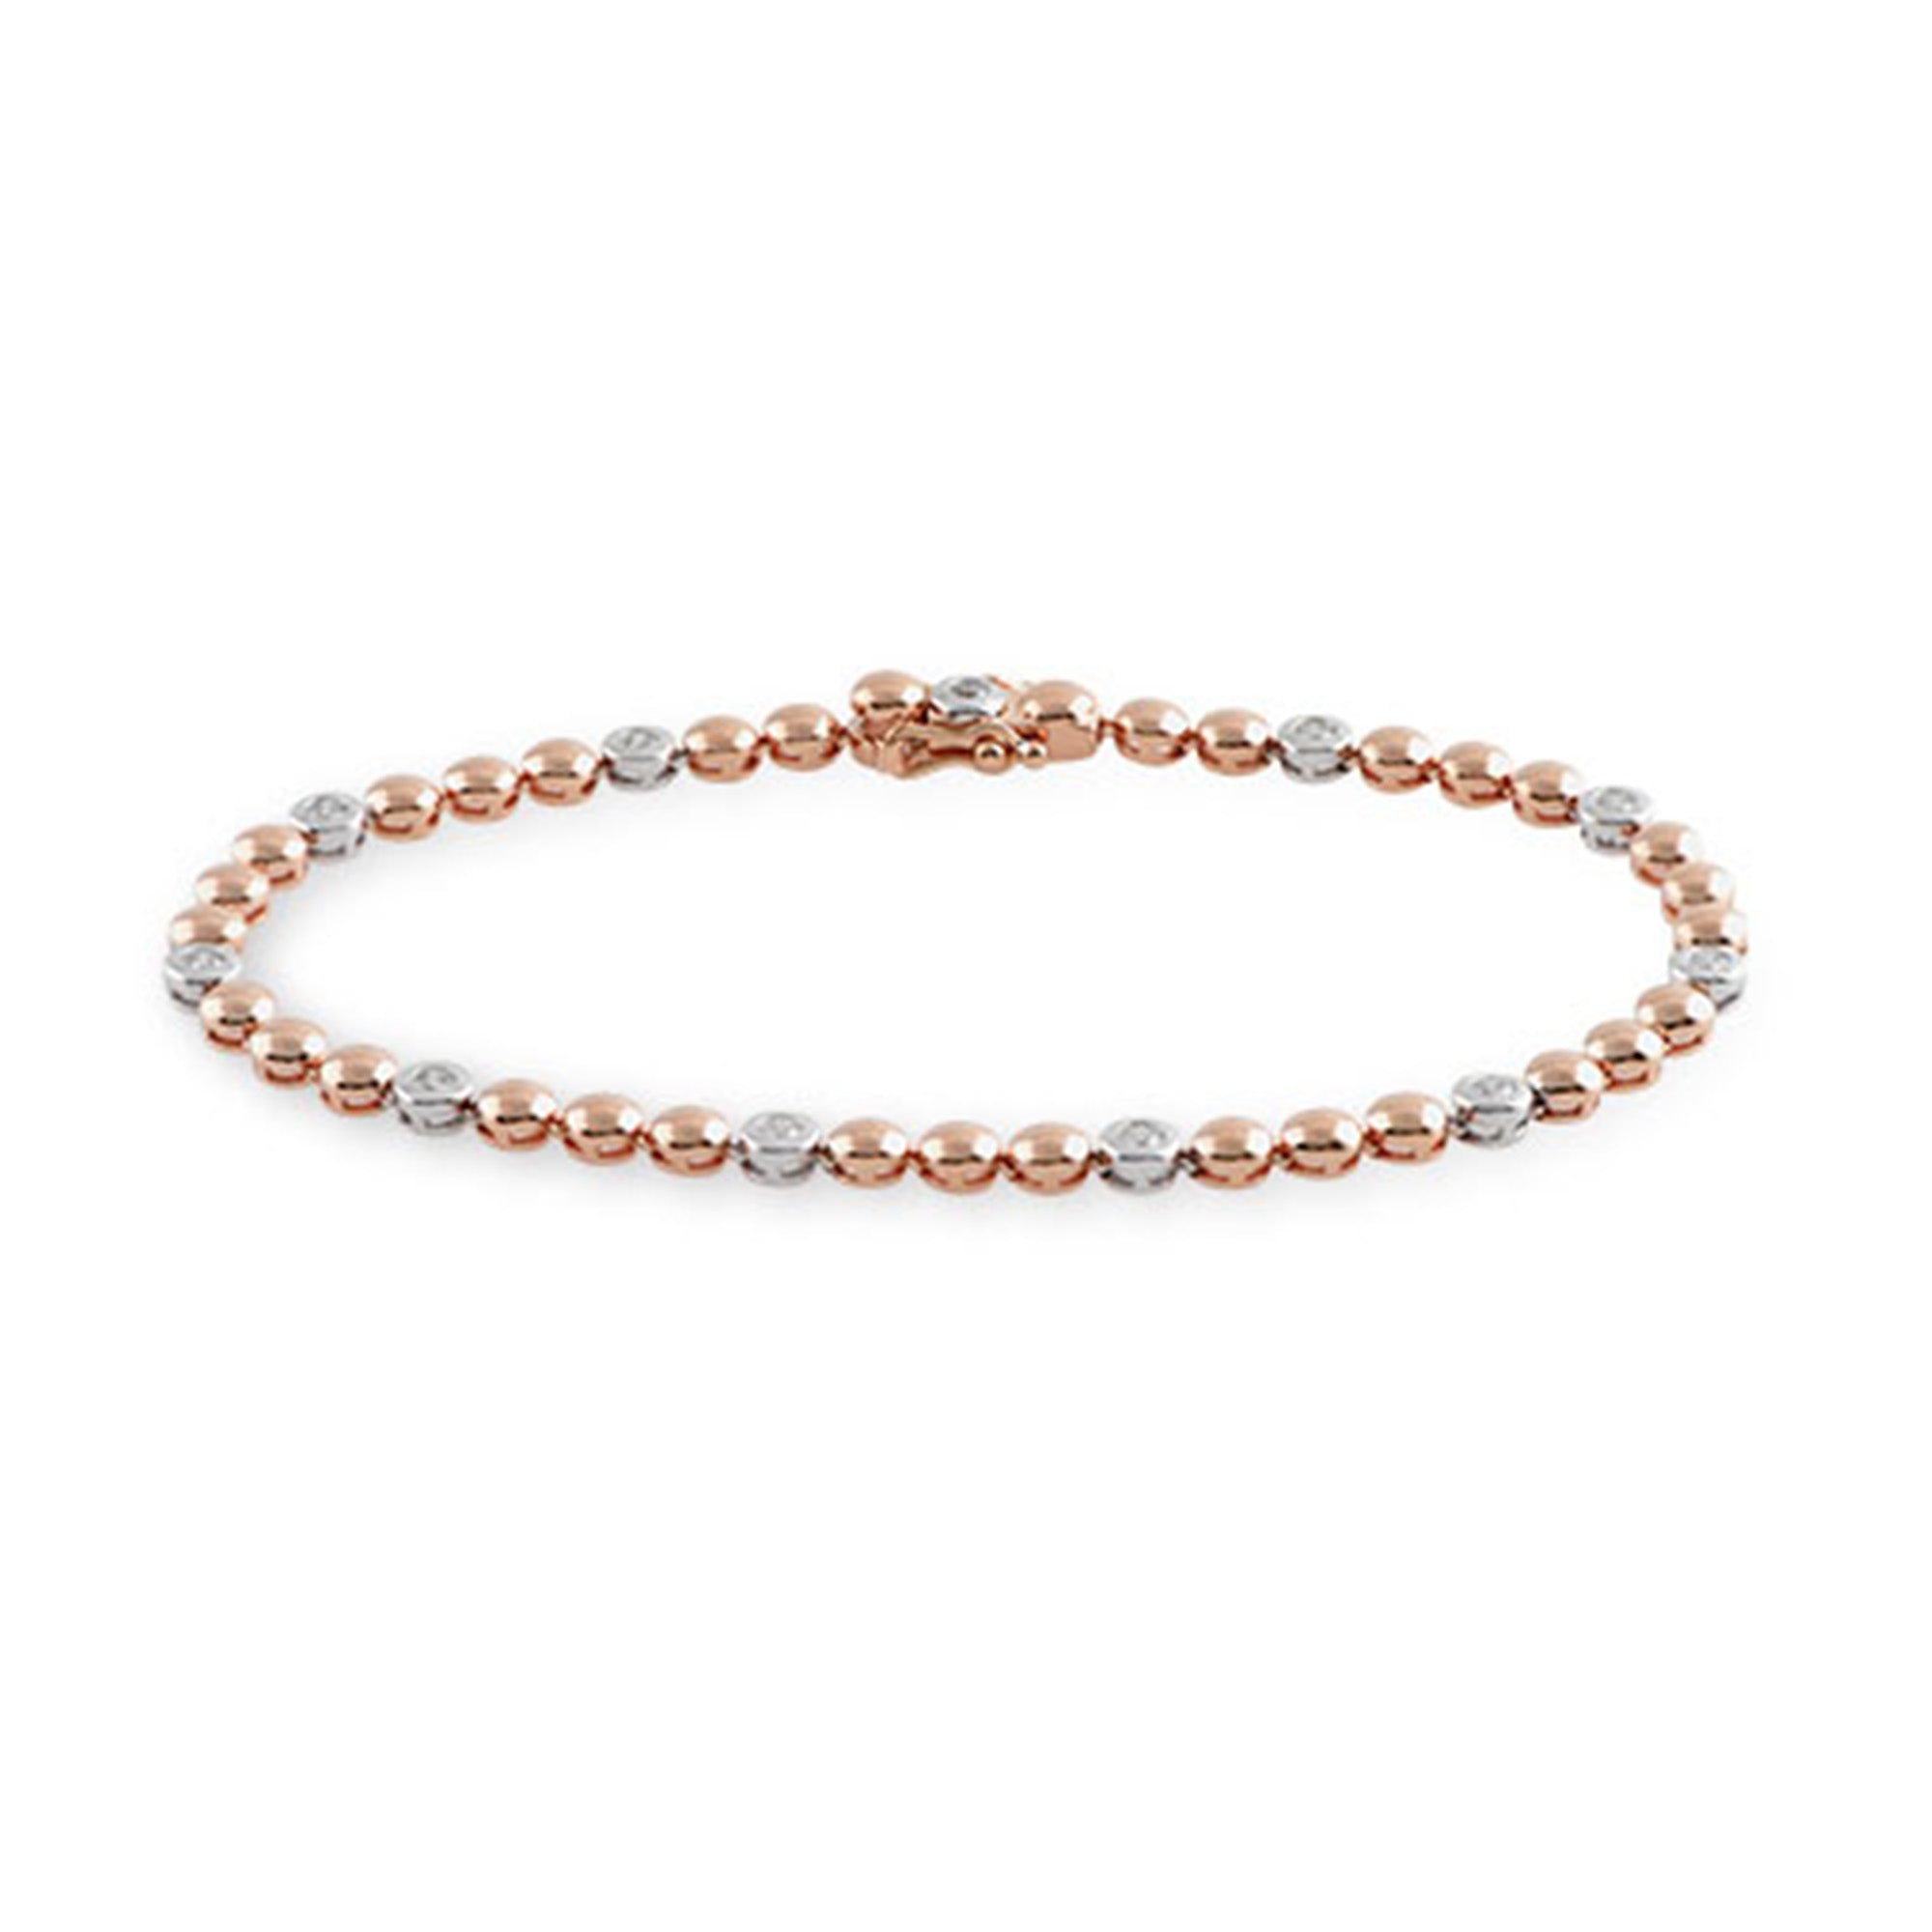 Diamond Bead Line Bracelet in 14k Rose and White Gold - Talisman Collection Fine Jewelers